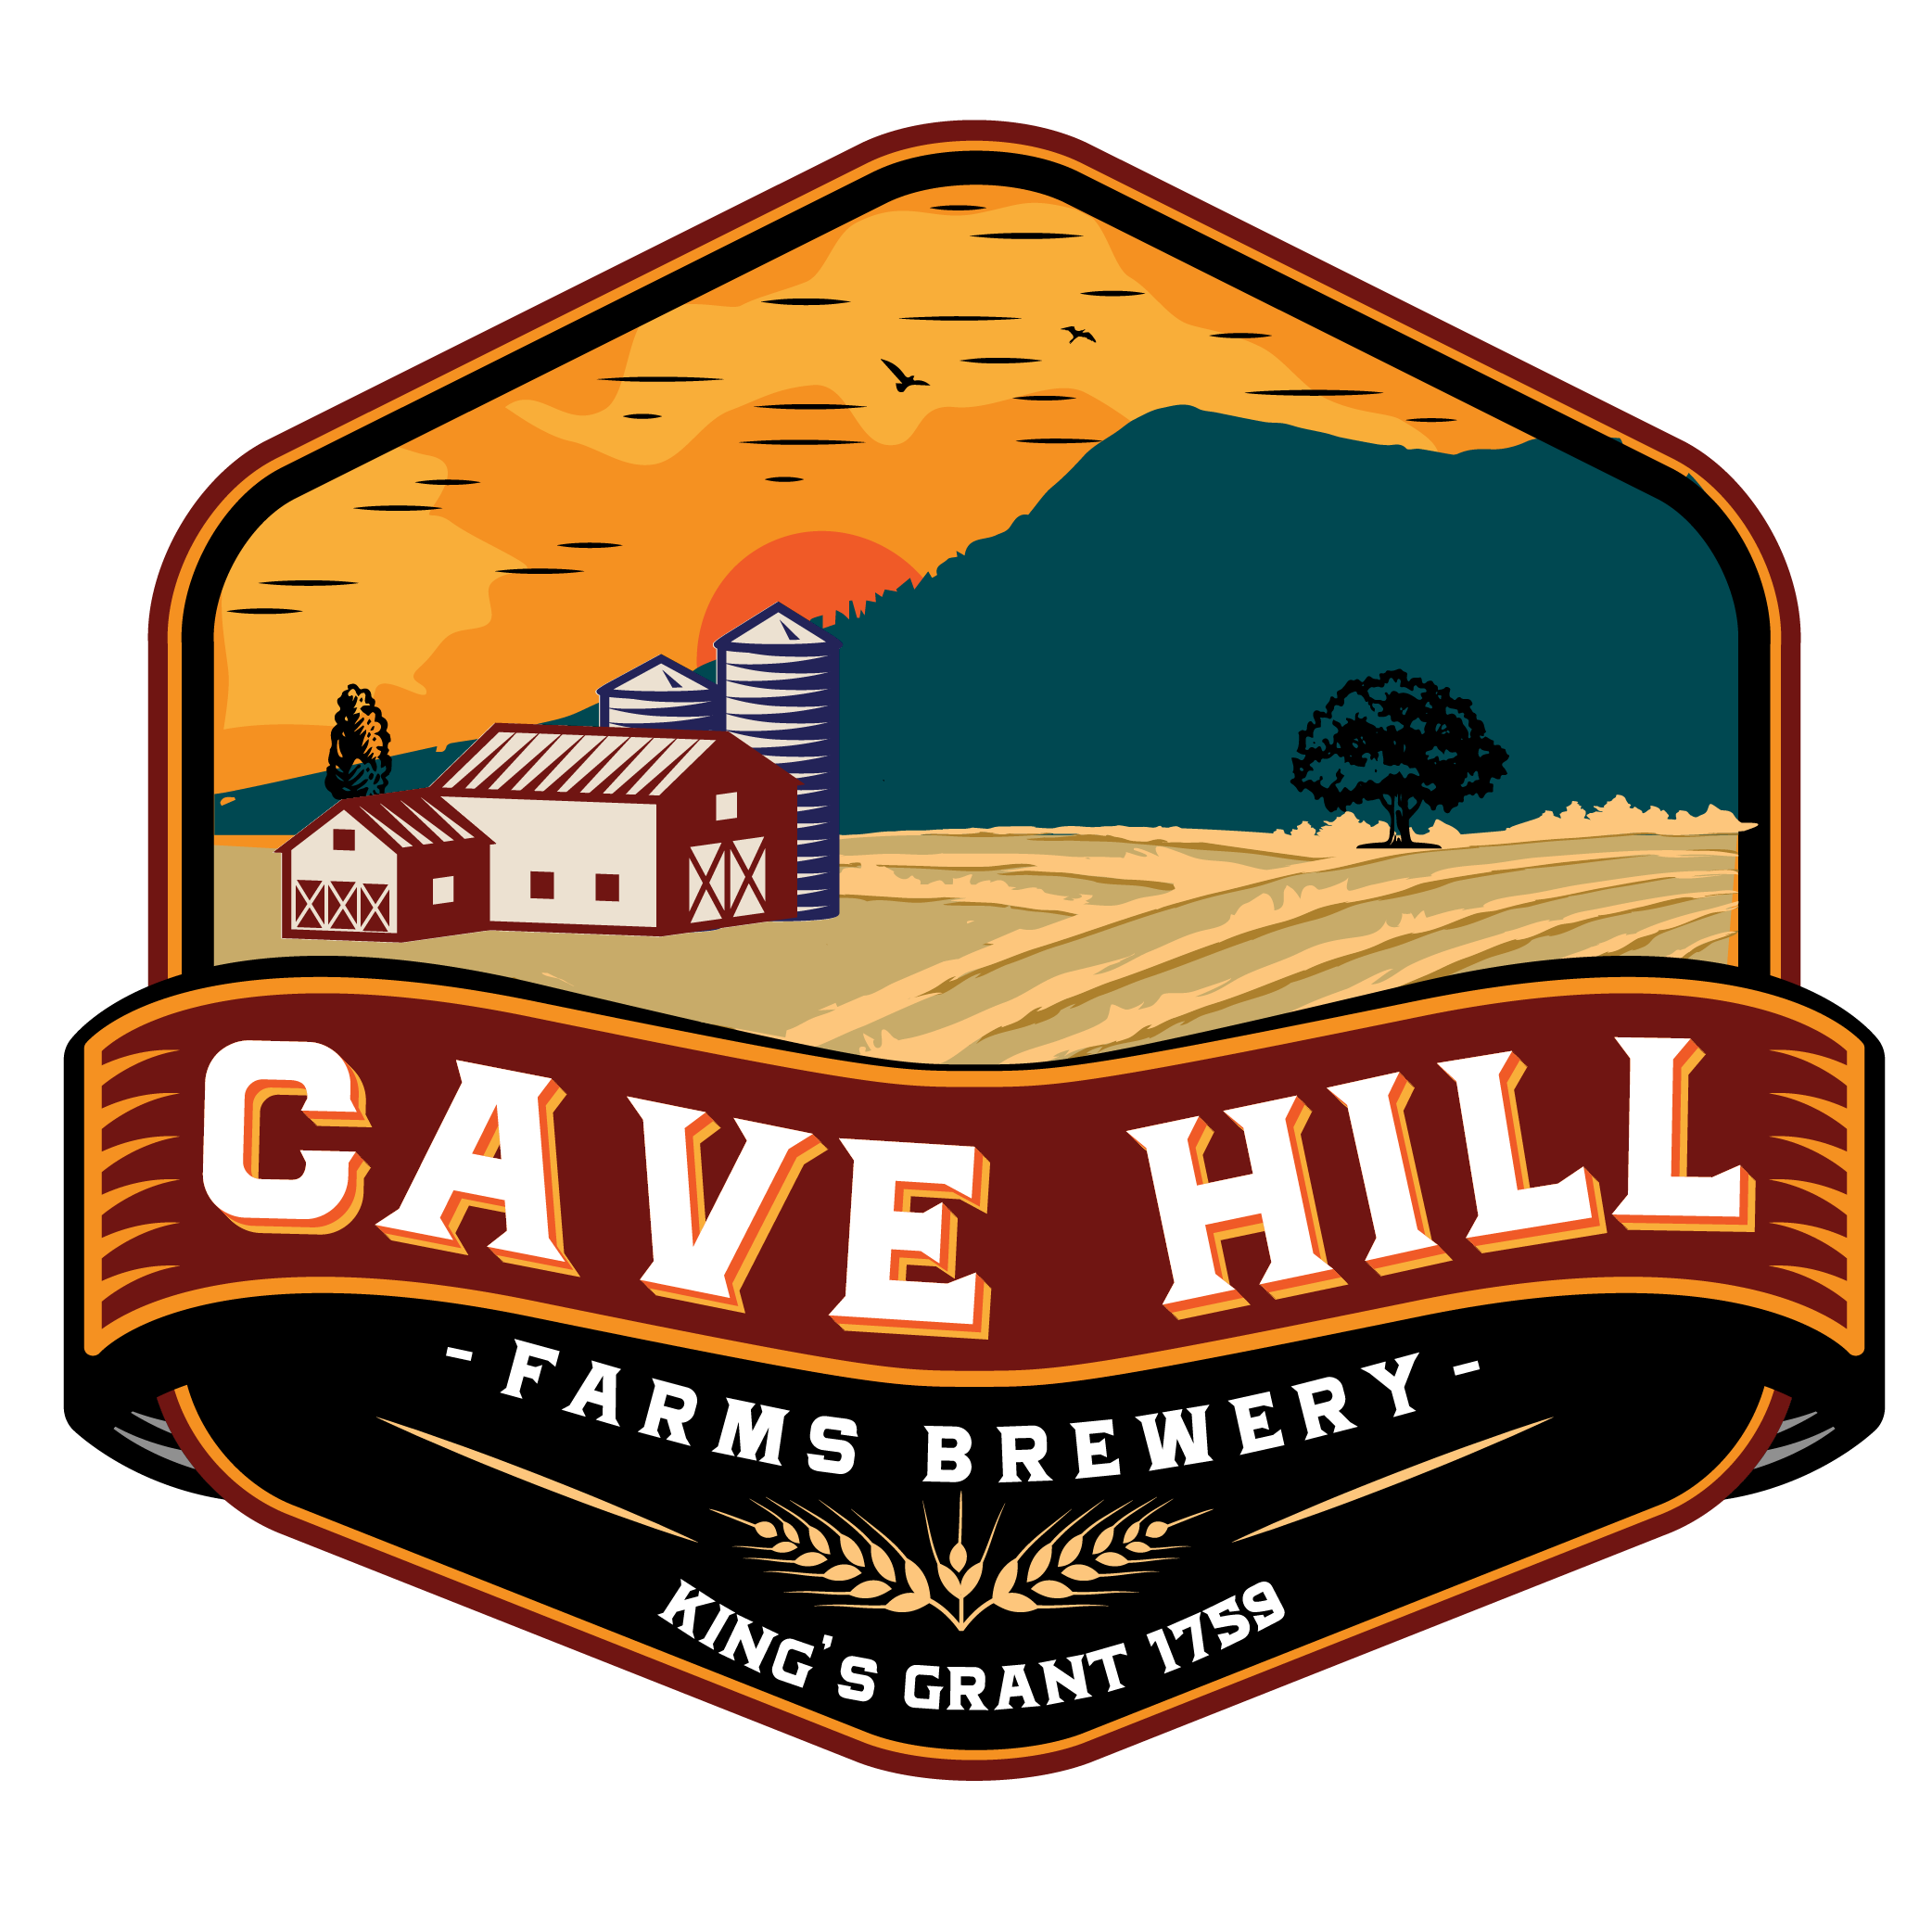 Cave Hill Farms Brewery